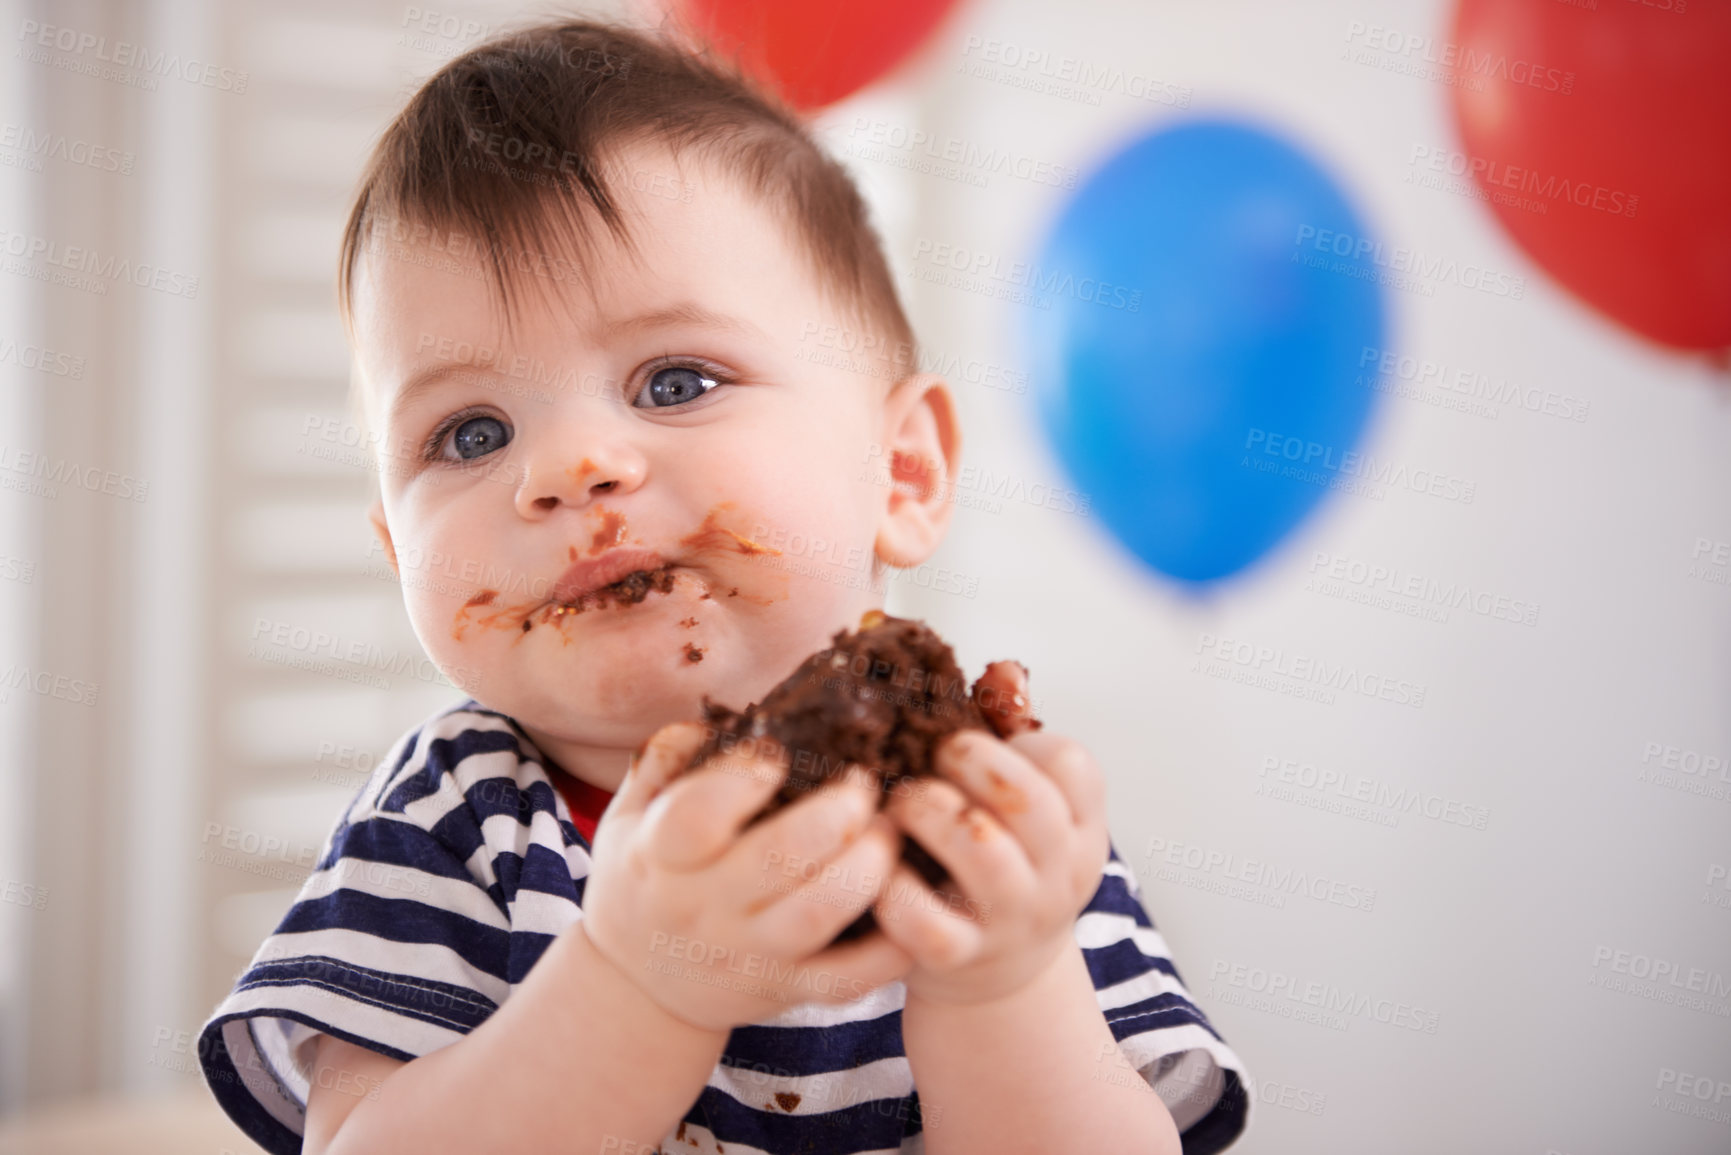 Buy stock photo Shot of a baby boy eating some cake on his birthday